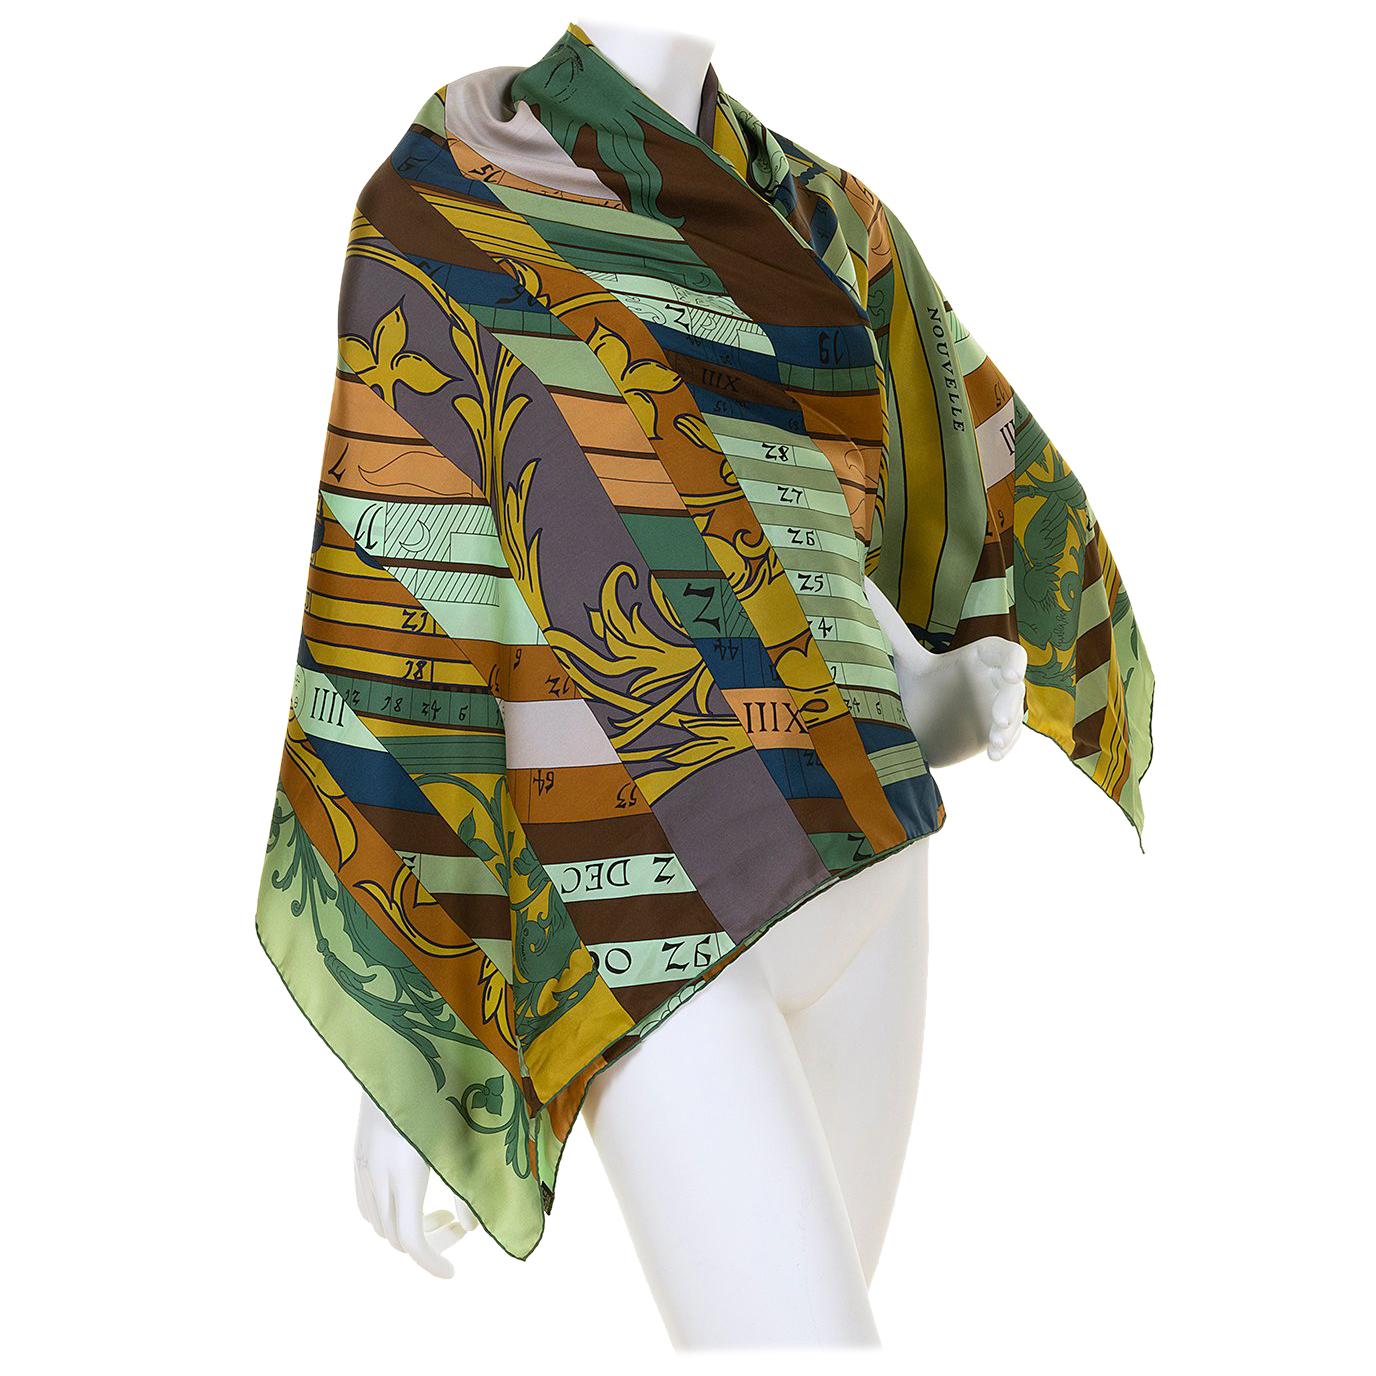 Hermes 55in x 55in Silk Shawl 'Astrologie Nouvelle' by Cyrille Diatkine - Rare For Sale